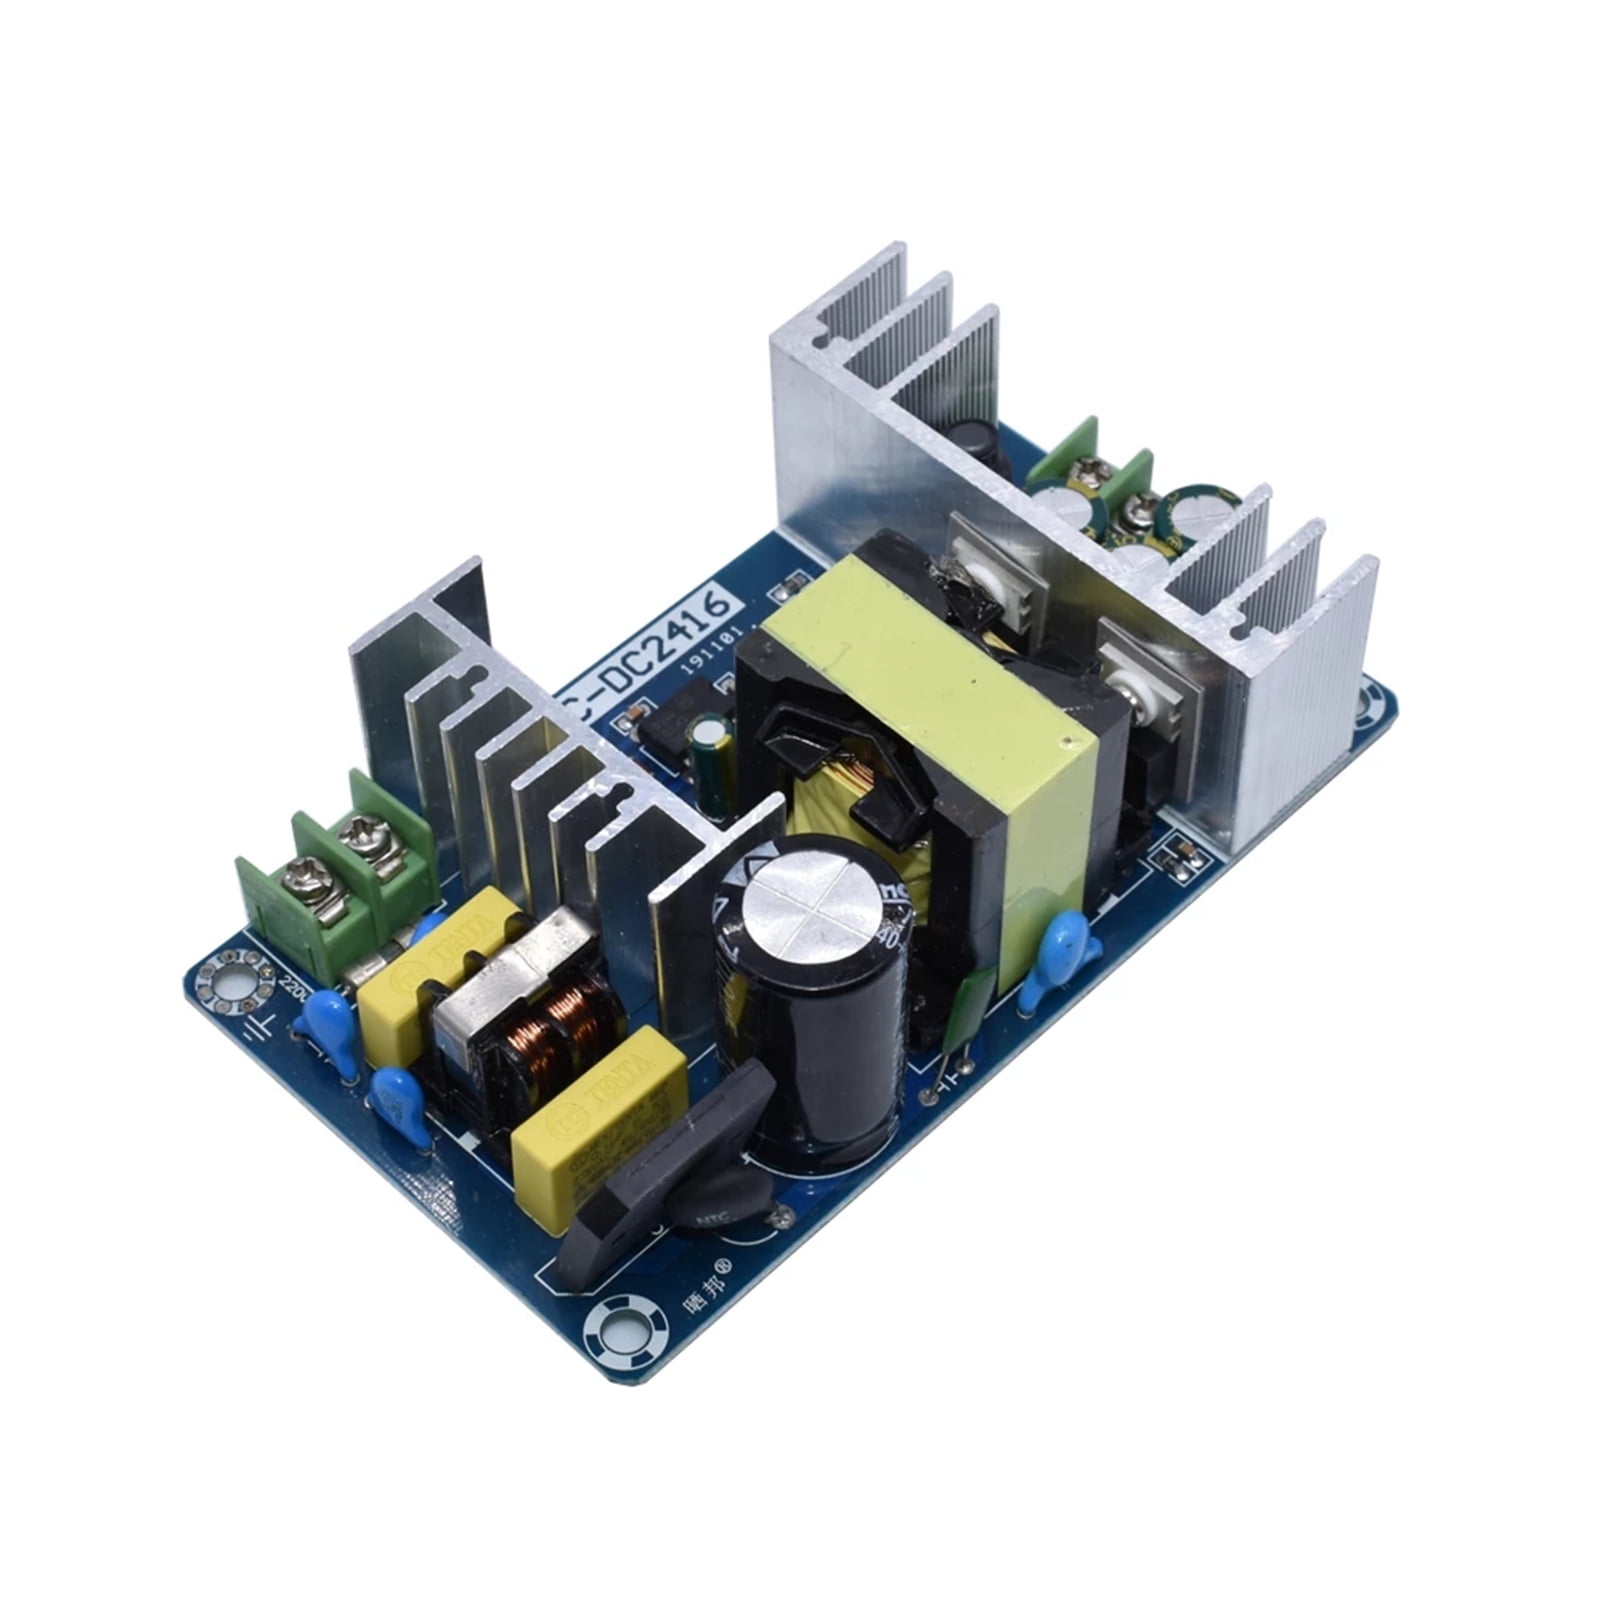 Power Supply Module AC 100-220V to DC 24V 6A 150W Switching Power Supply Board 50HZ 60HZ